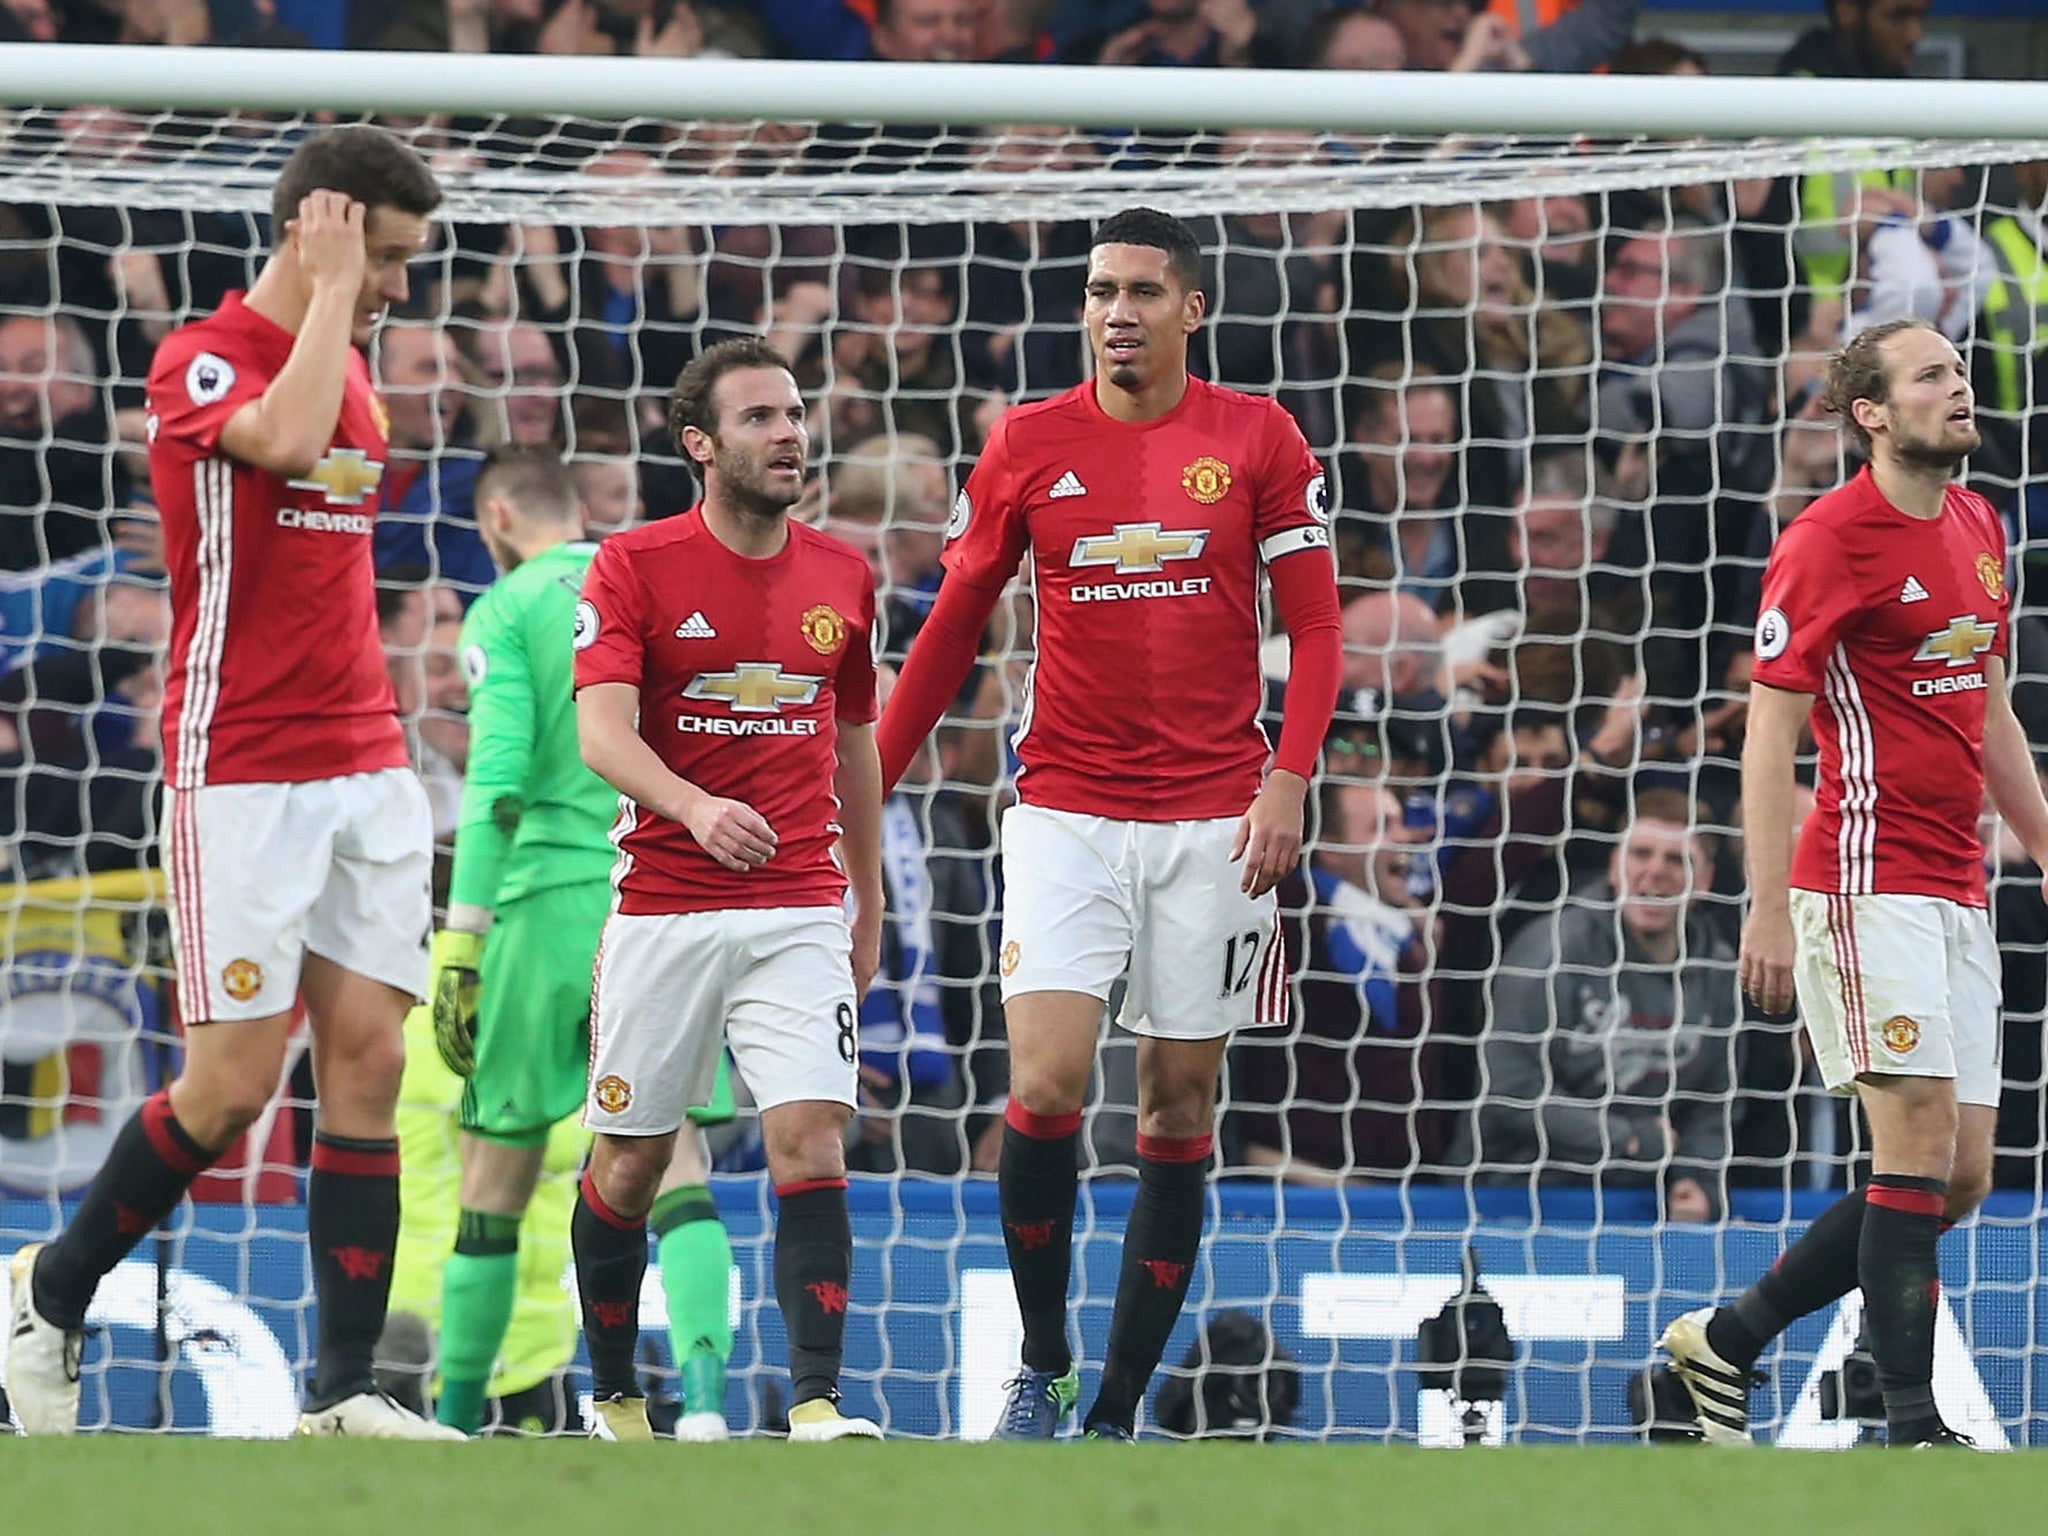 Manchester United were humbled at Stamford Bridge earlier this season